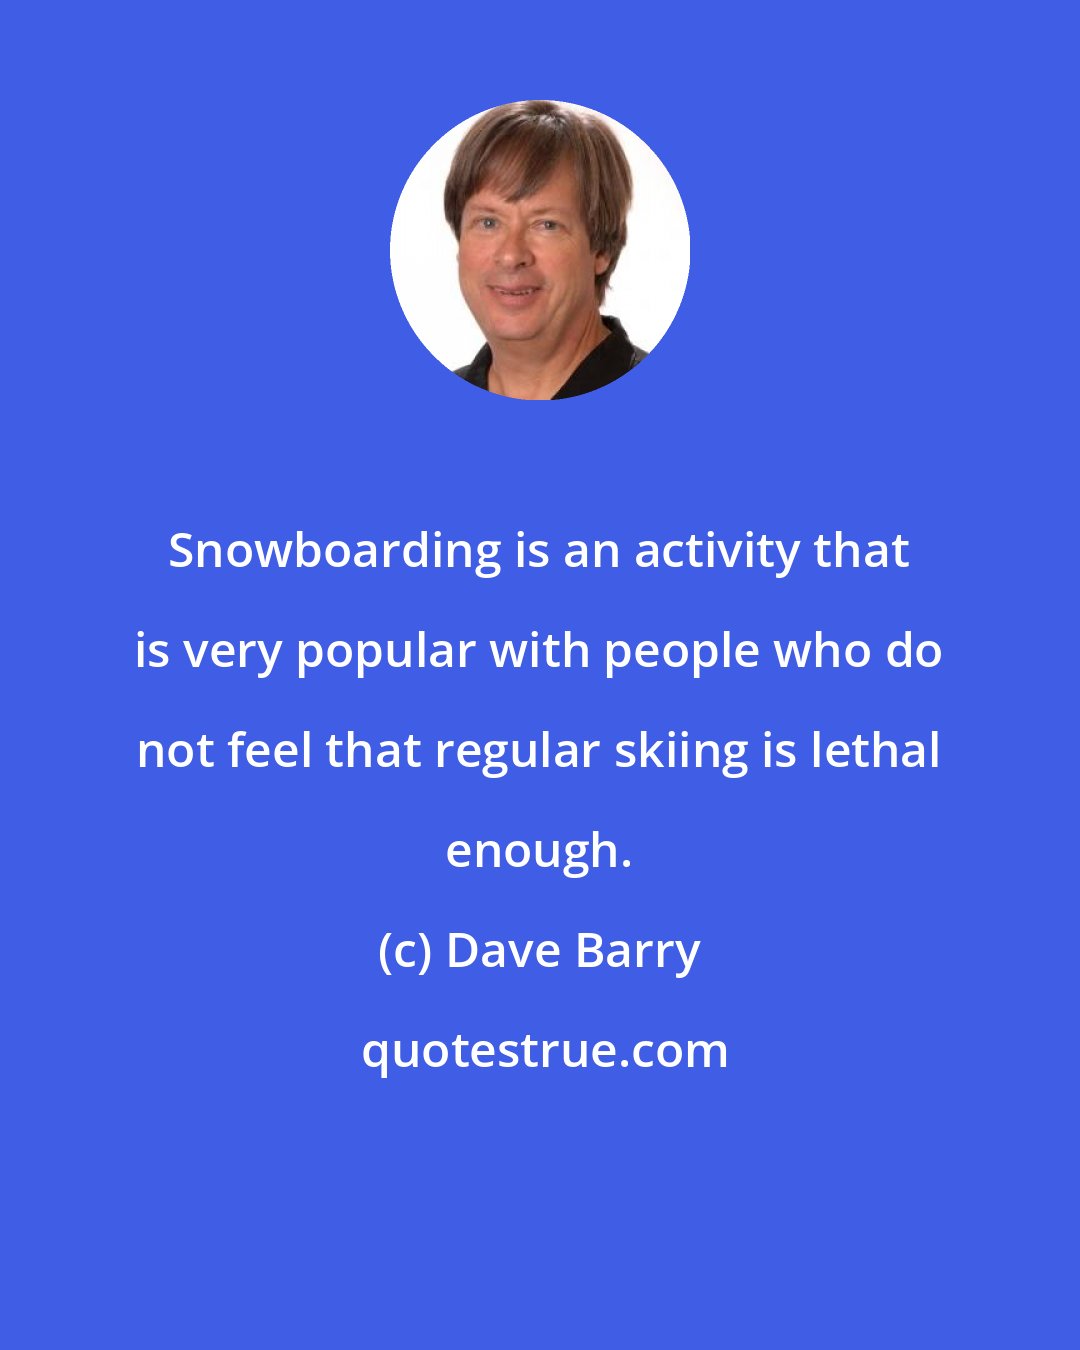 Dave Barry: Snowboarding is an activity that is very popular with people who do not feel that regular skiing is lethal enough.